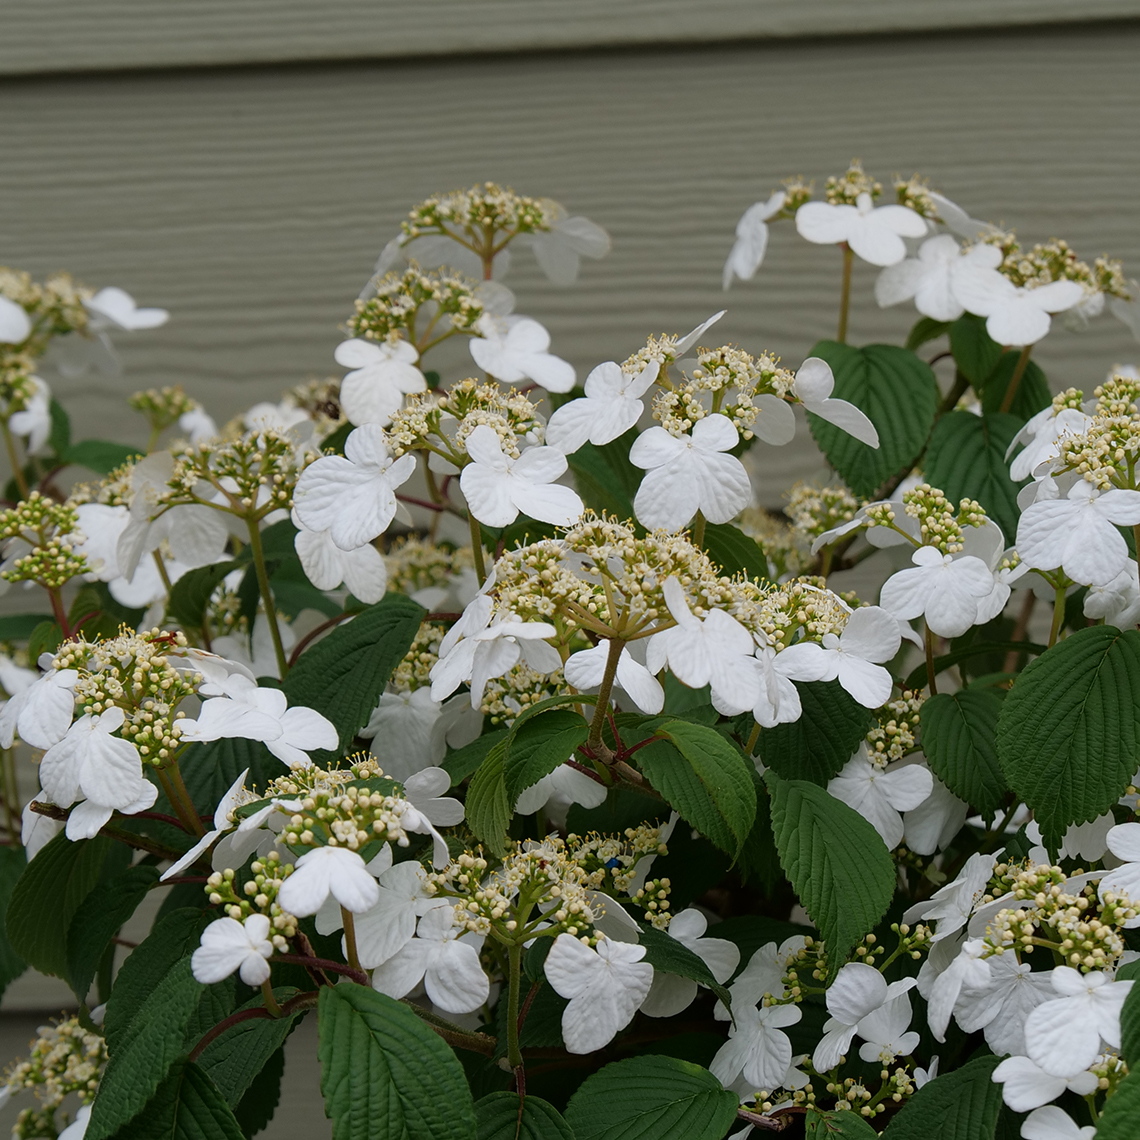 Close up of Steady Eddy's strong white blooms